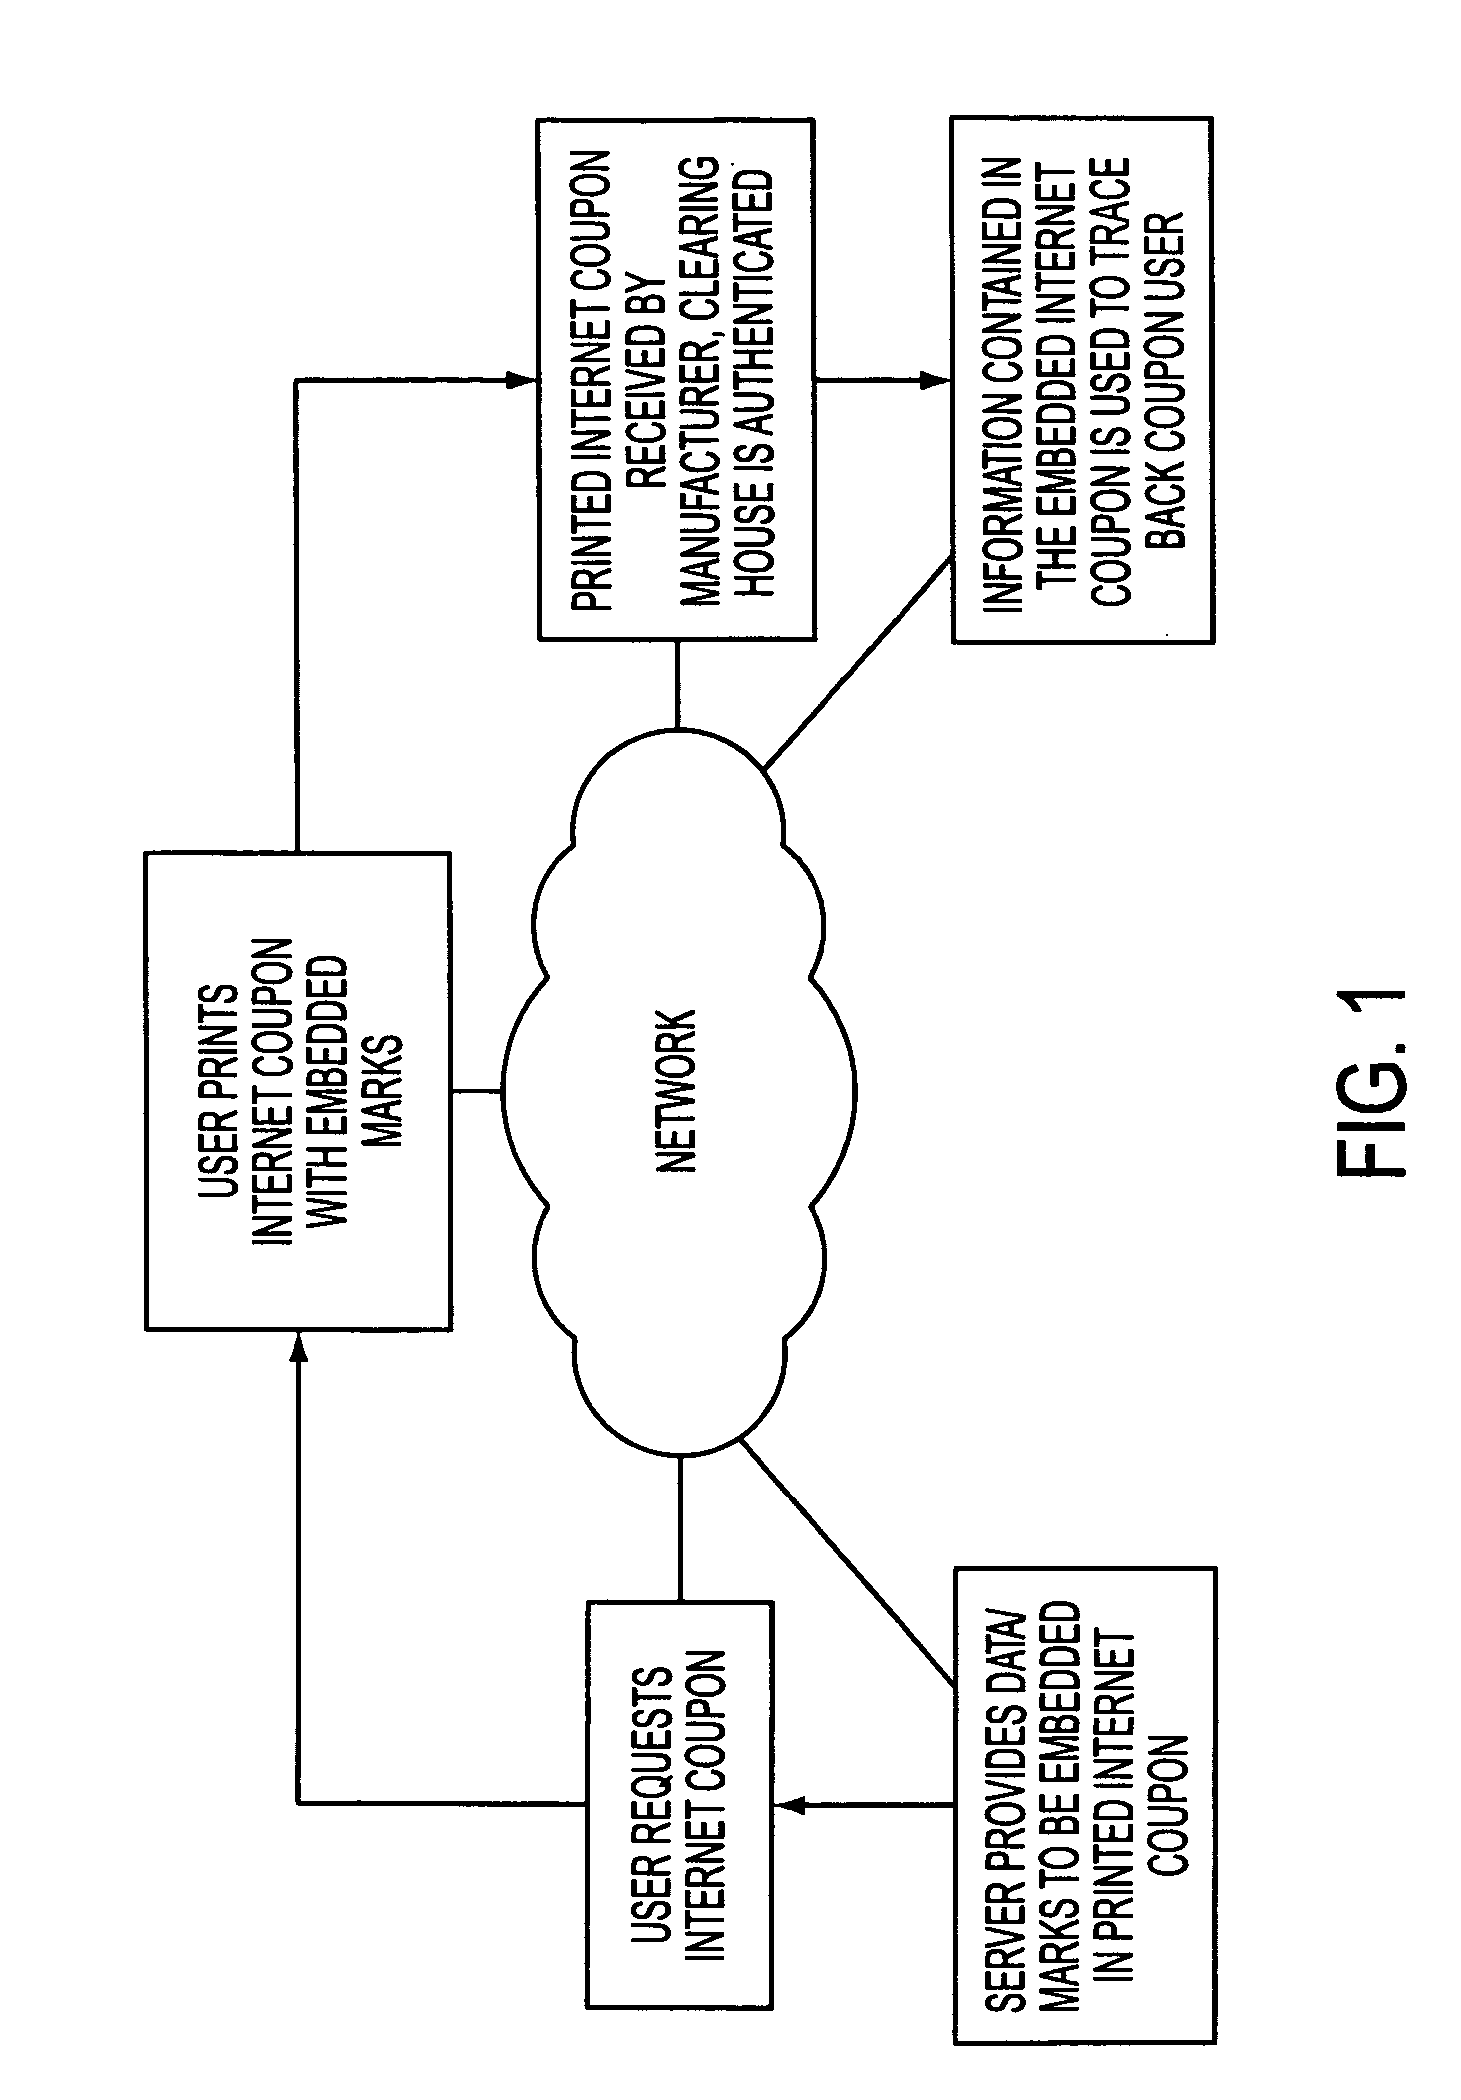 Method and apparatus for internet coupon fraud deterrence